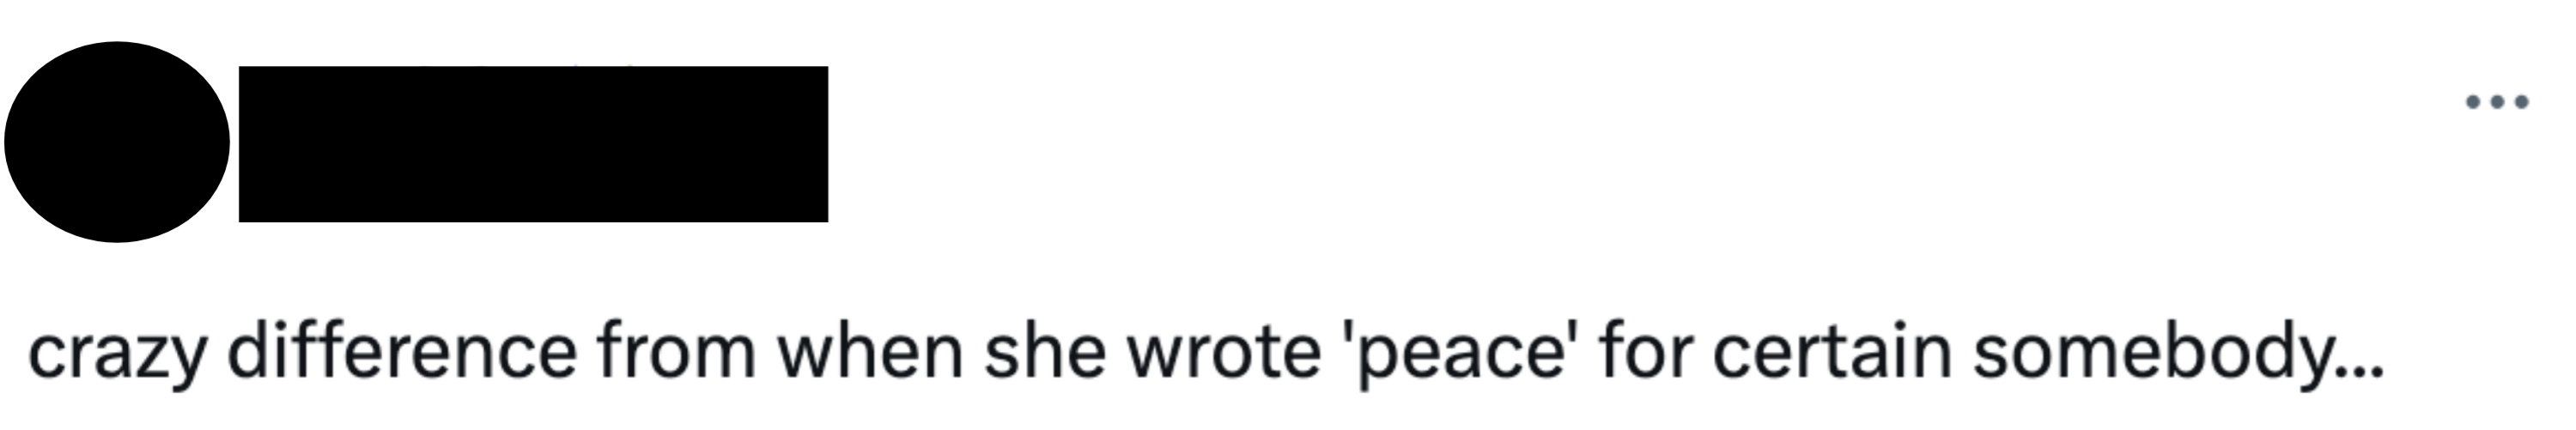 “Crazy difference from when she wrote &#x27;peace&#x27; for certain somebody…”